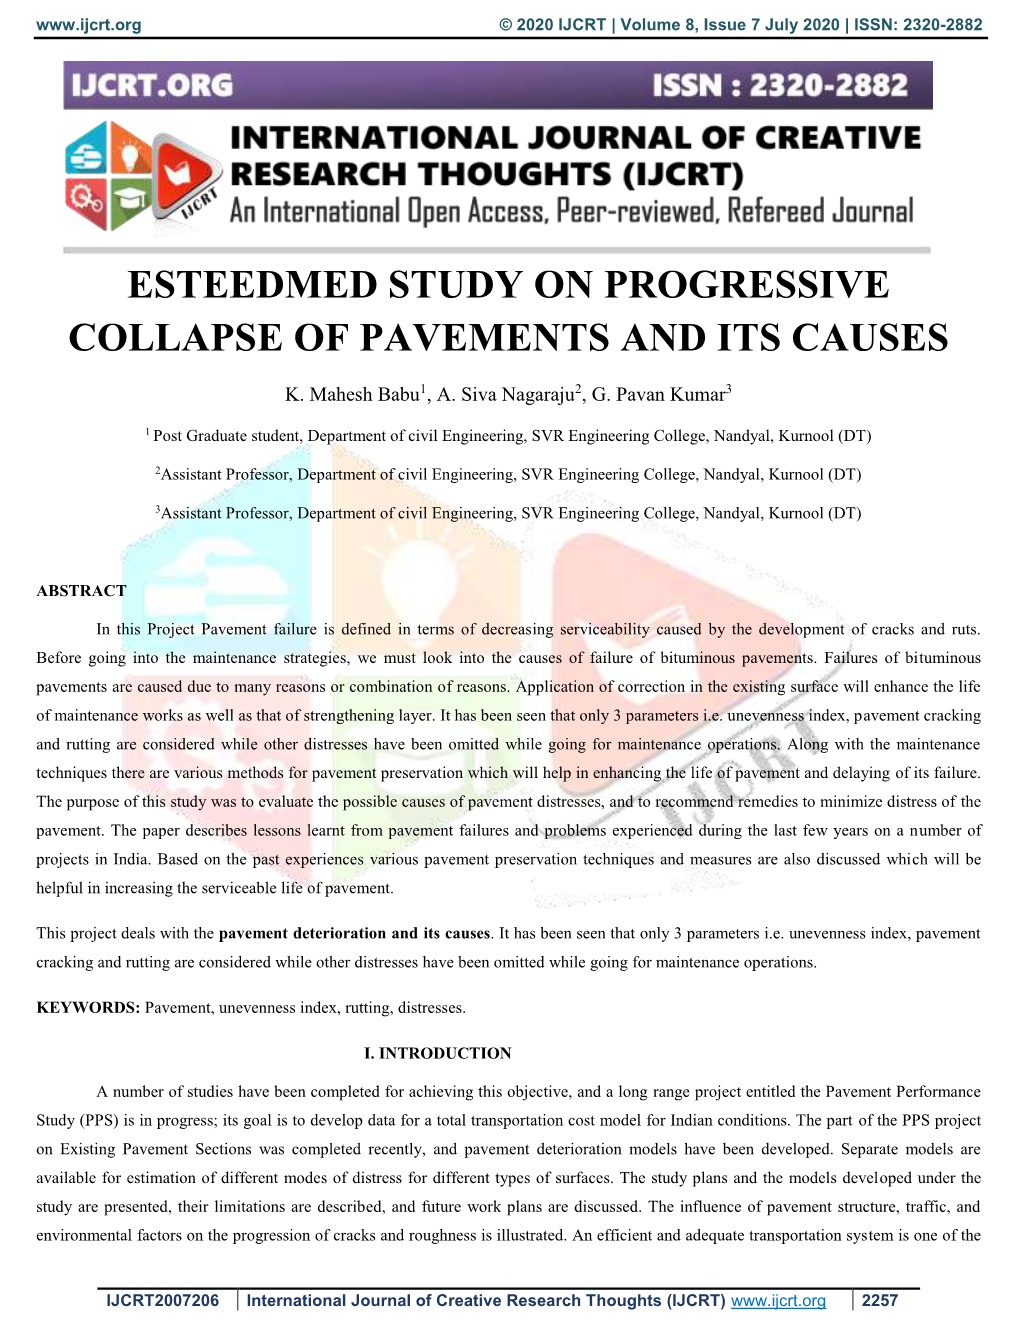 Esteedmed Study on Progressive Collapse of Pavements and Its Causes